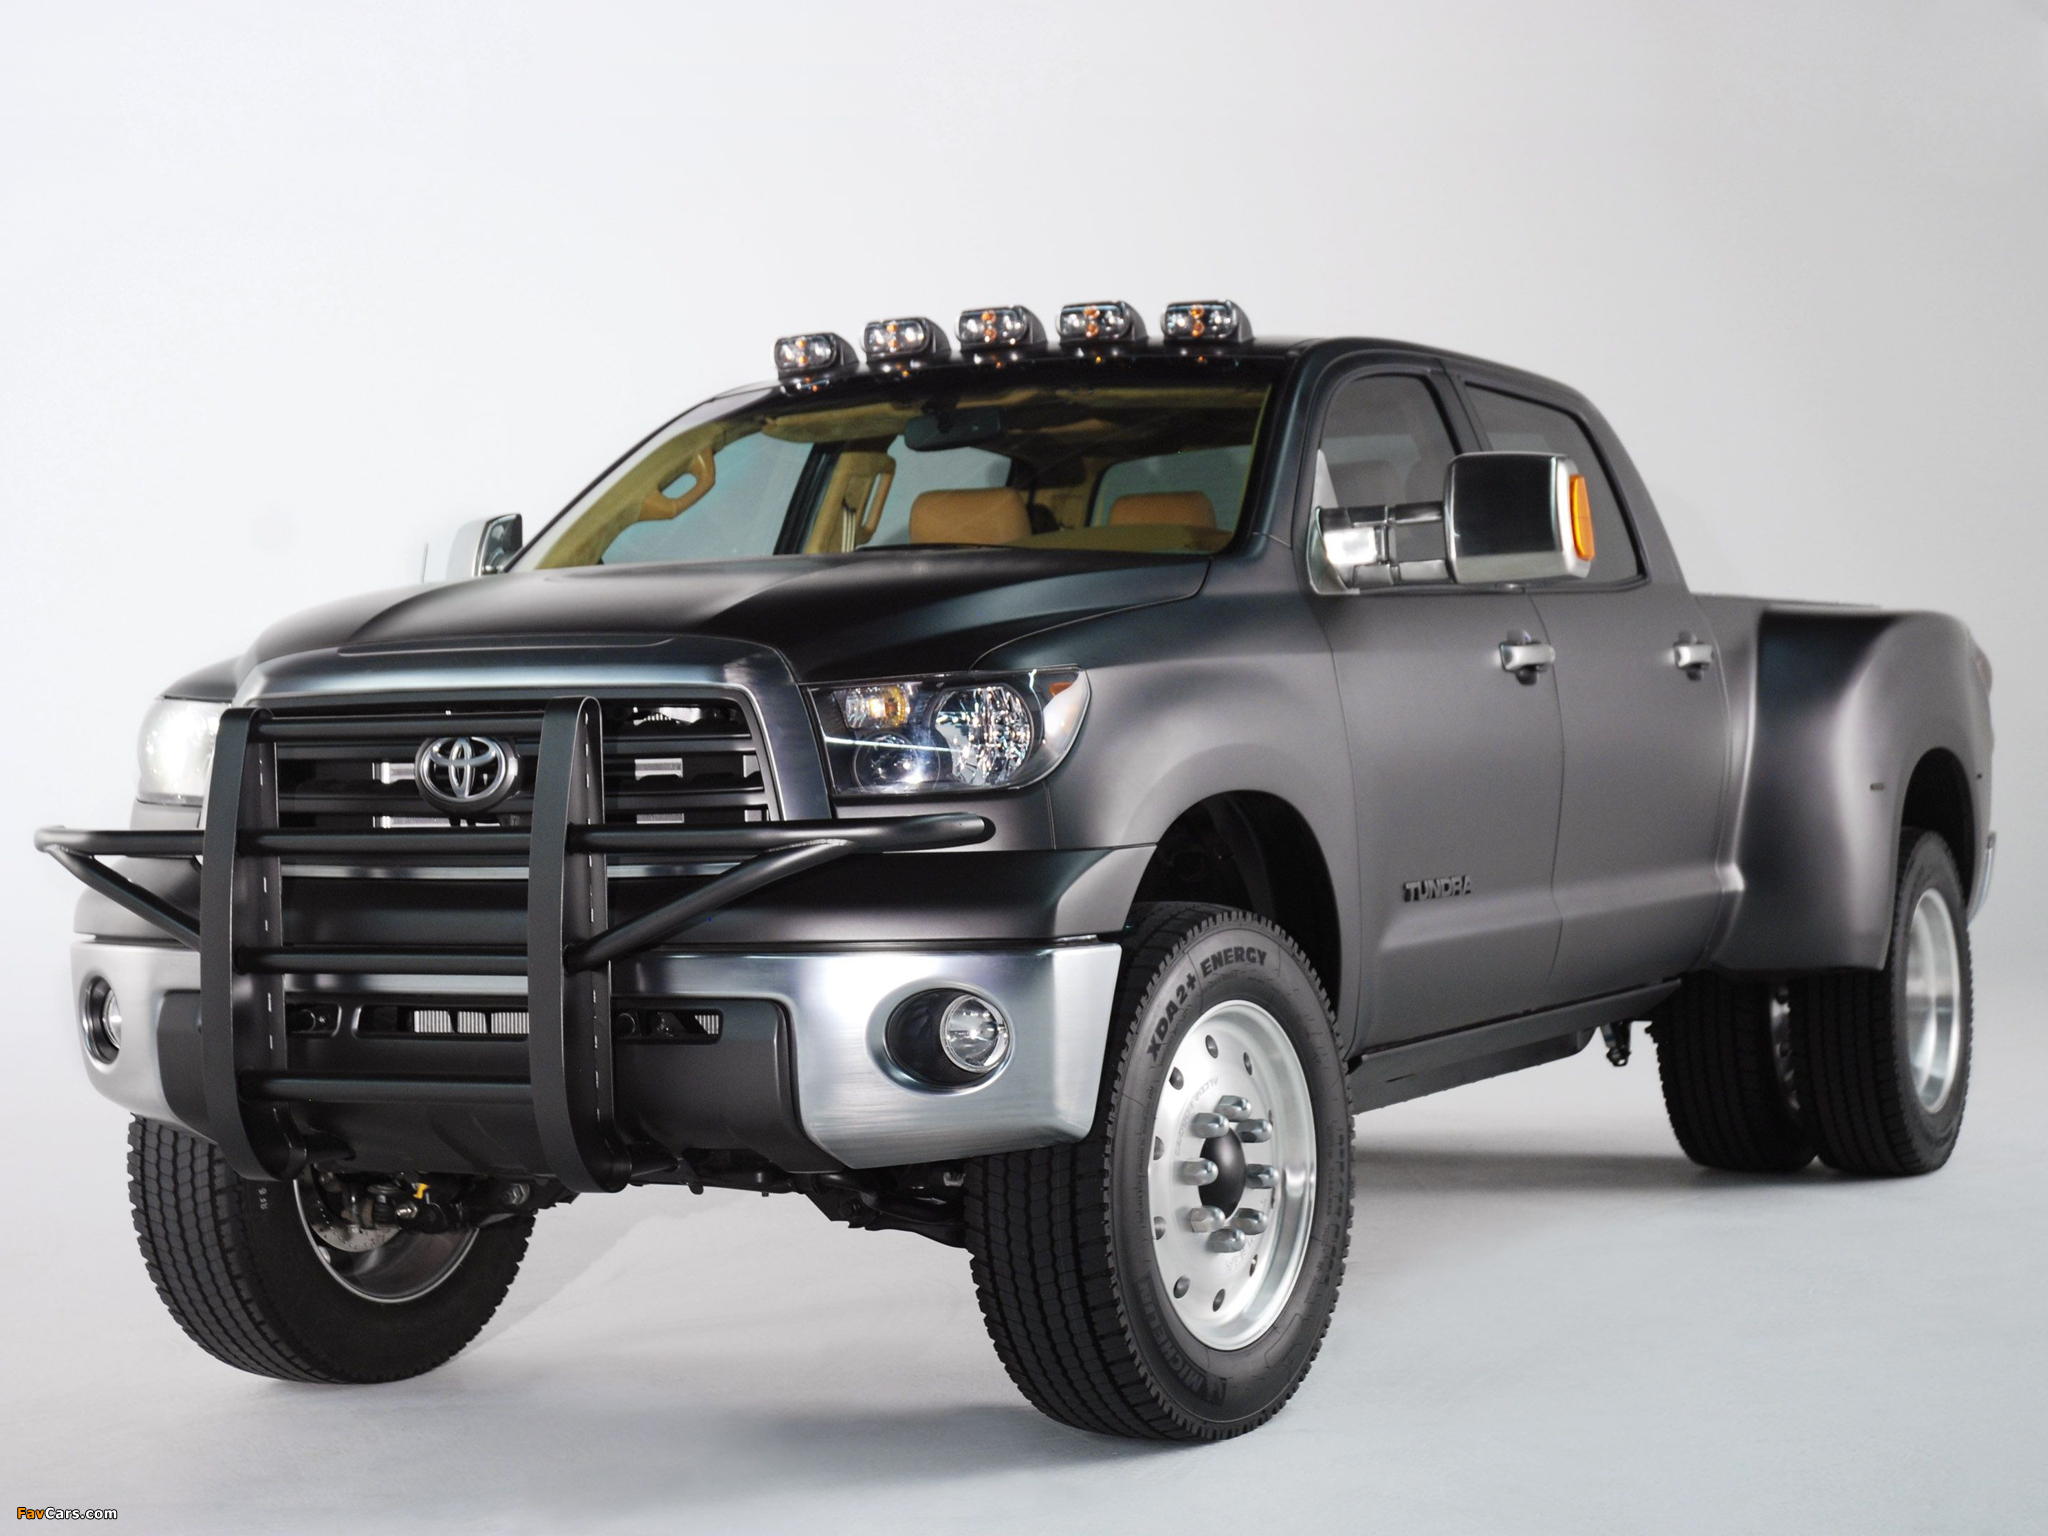 Toyota Tundra Dually Diesel Concept Wallpaper